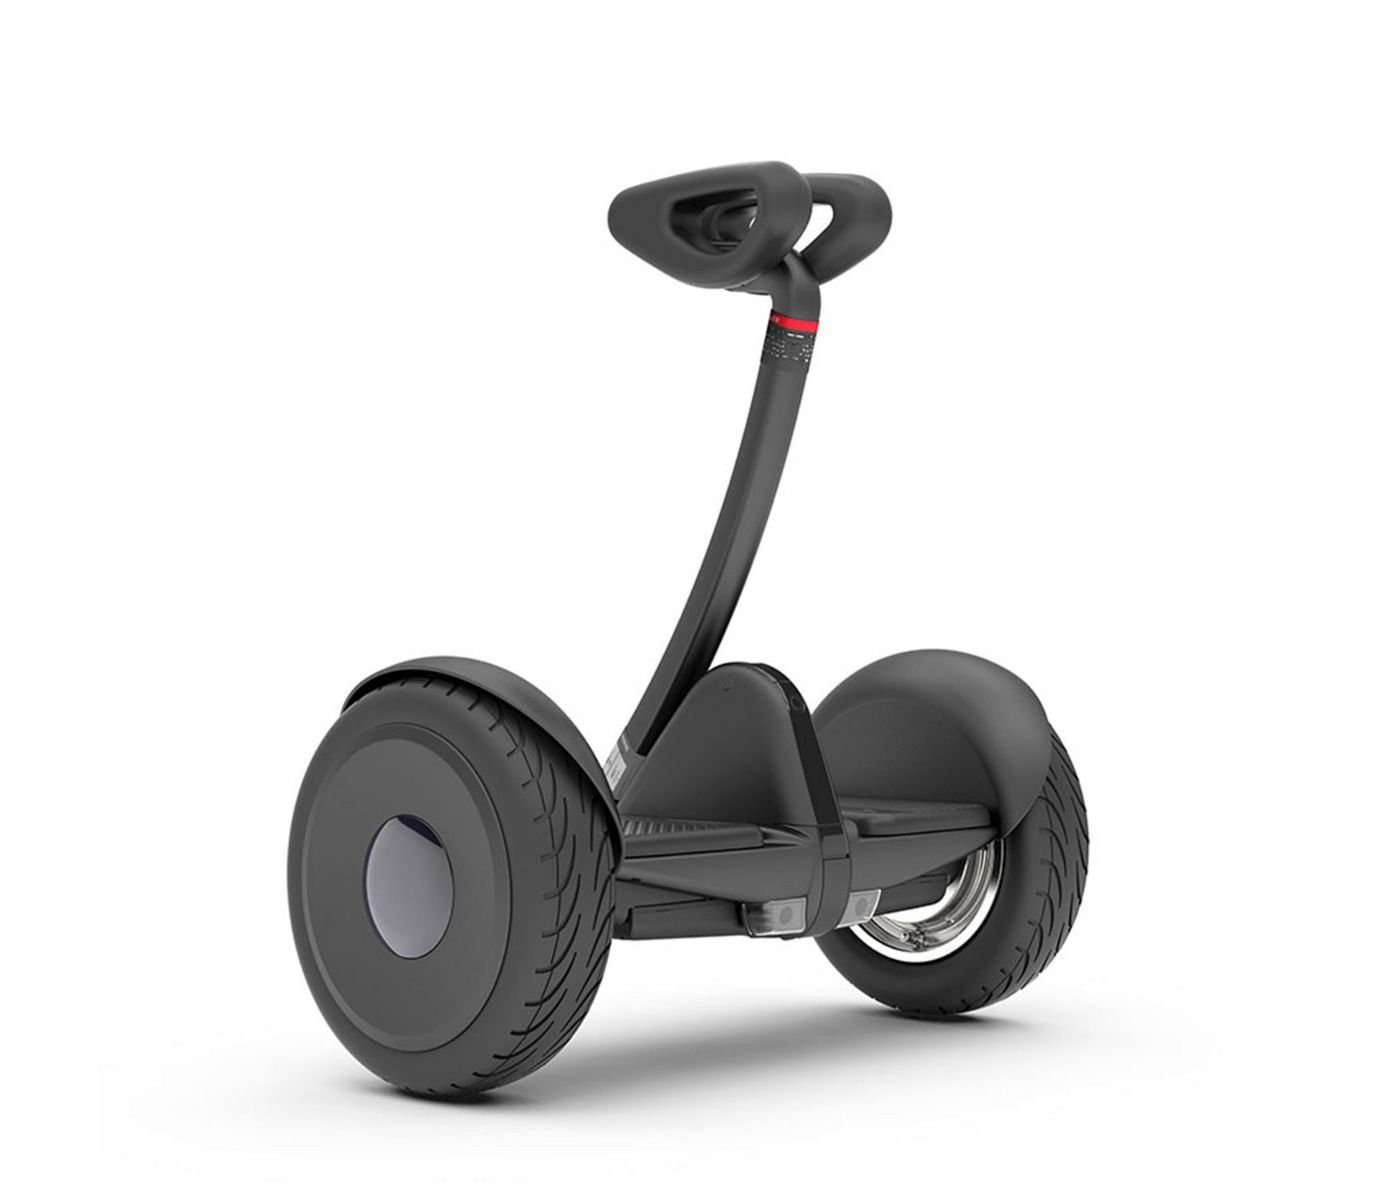 Segway Ninebot S Android Smart Self-Balancing Electric Scooter Transporter (Black)